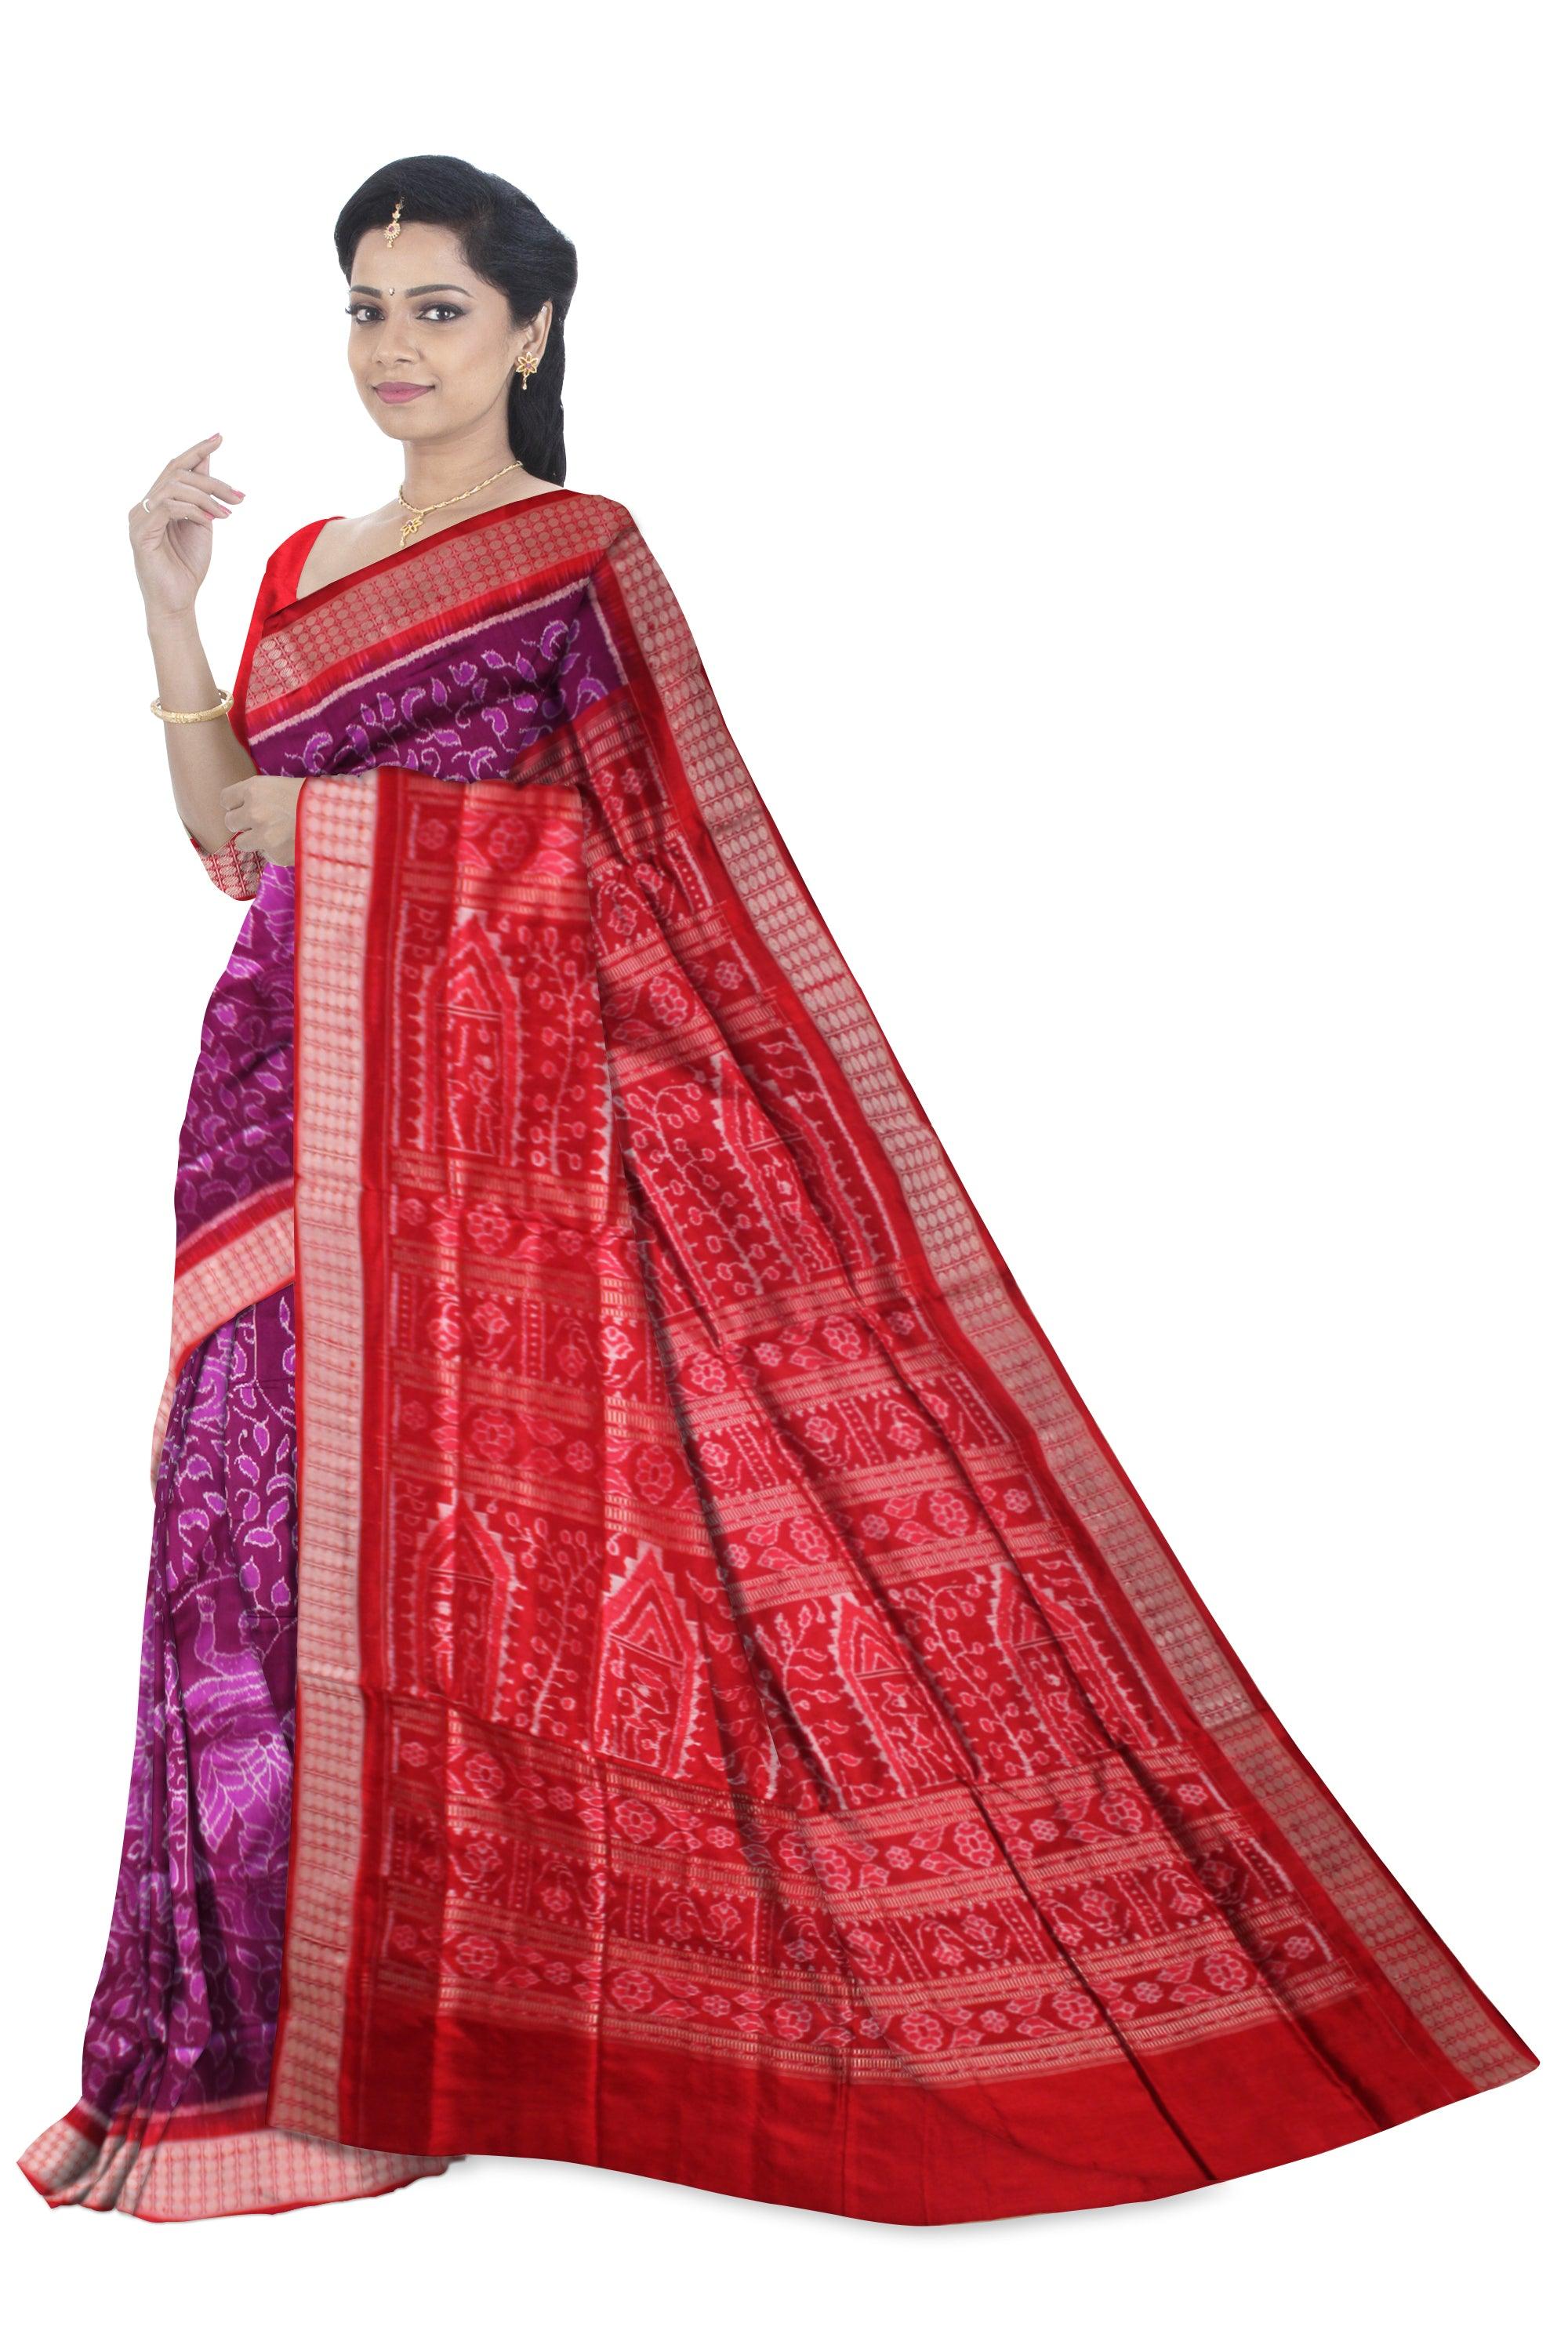 A SONEPUR NARTAKI SAREE IN  PURPLE AND RED COLOR , WITH BLOUSE PIECE. - Koshali Arts & Crafts Enterprise